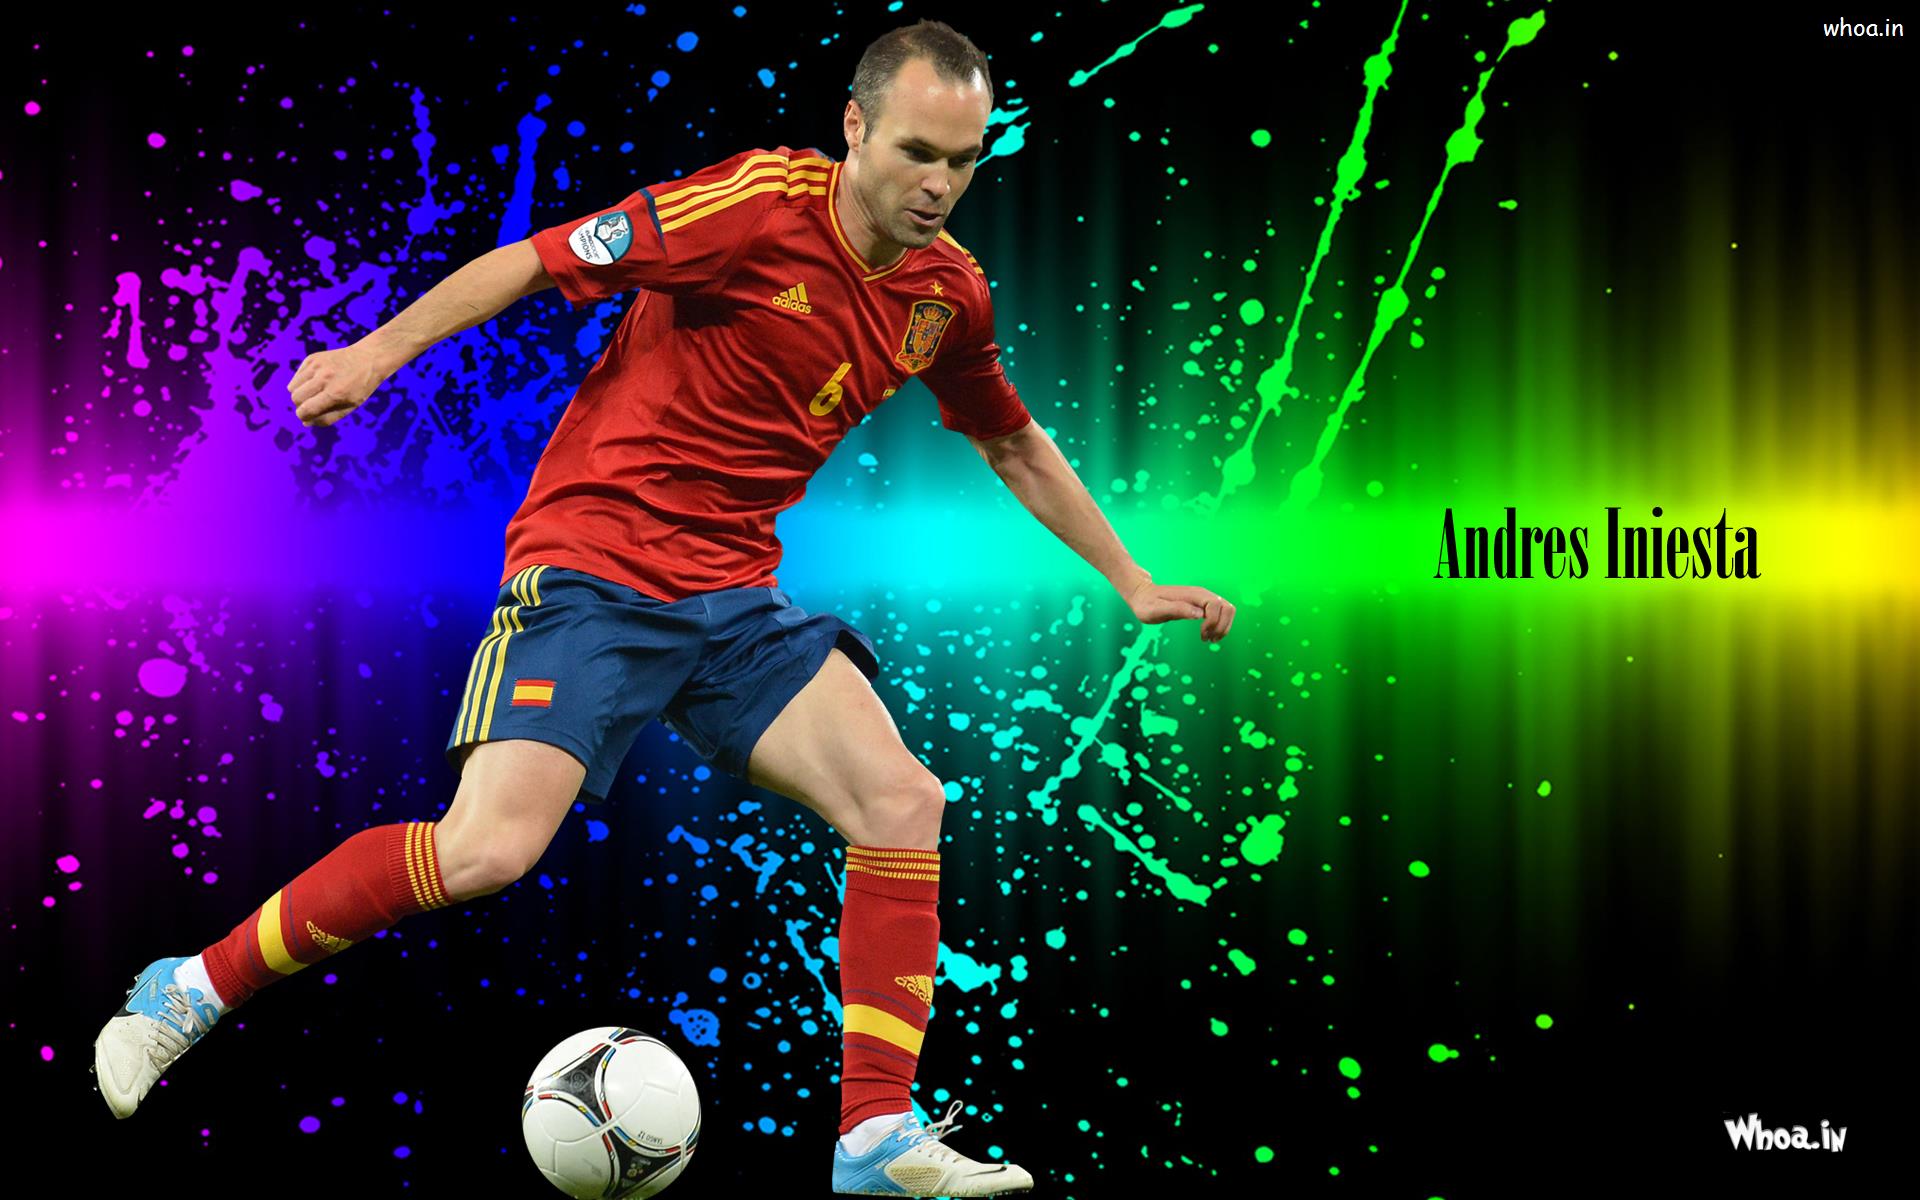 andres-iniesta-about-to-kick-ball-wallpaper